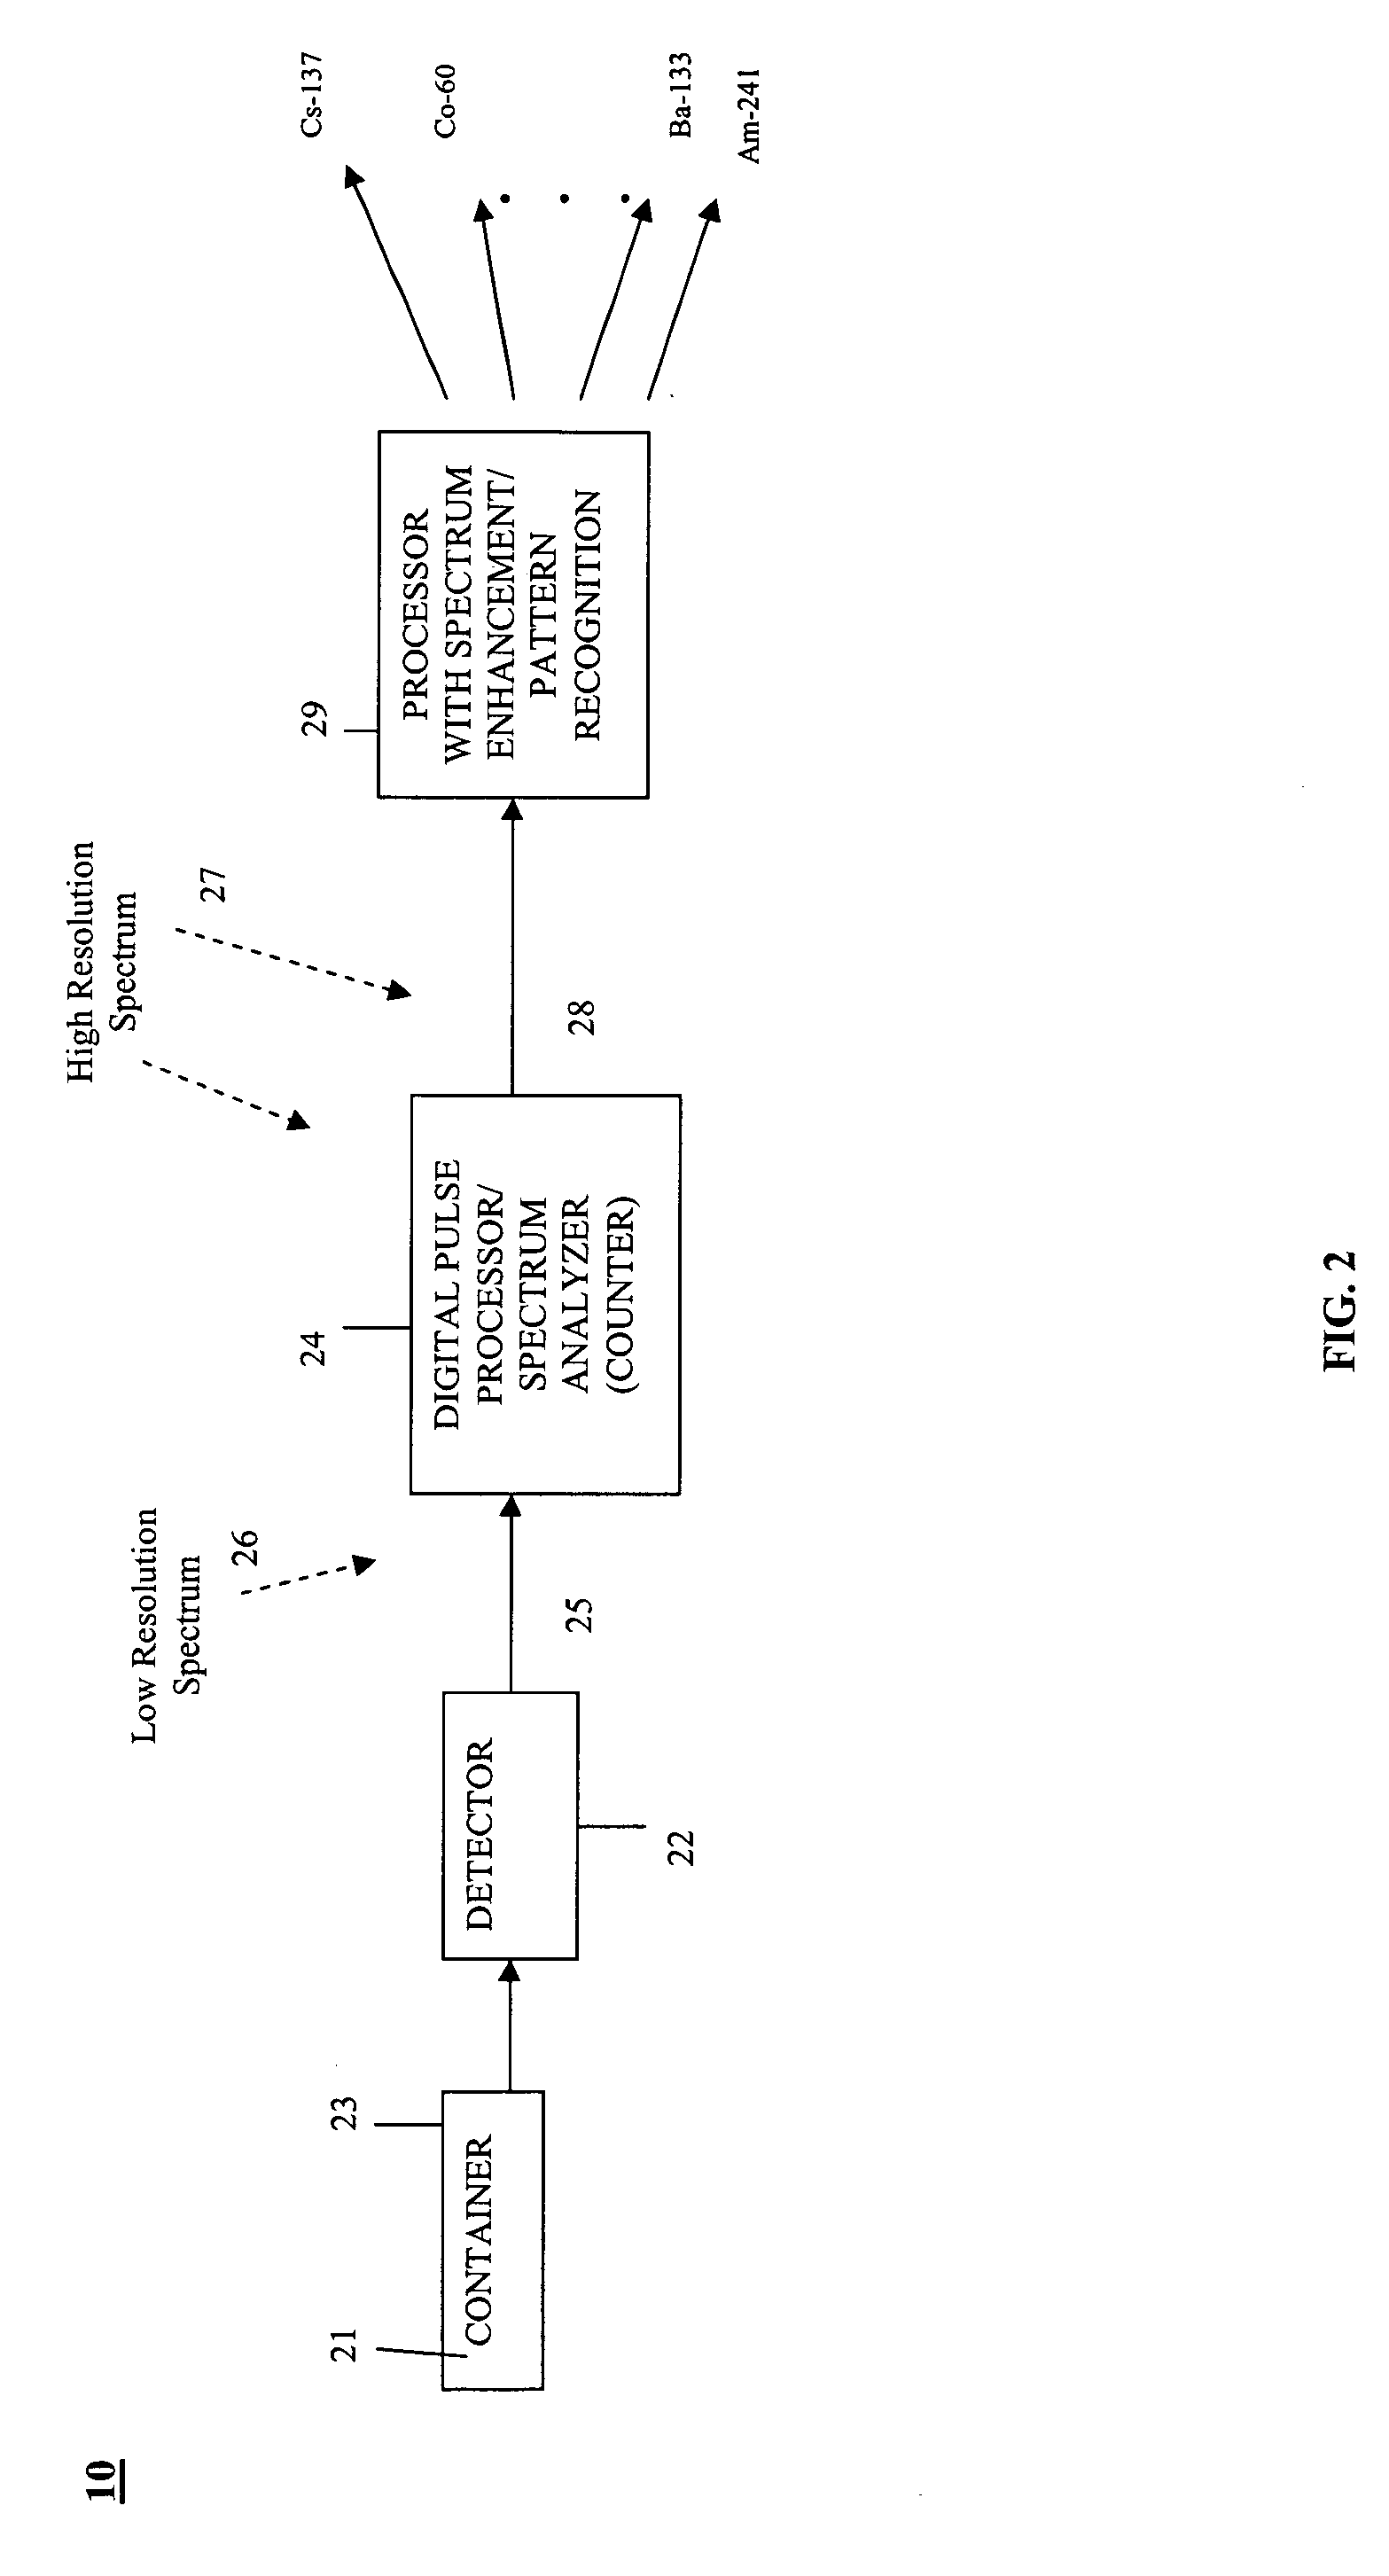 System and method for detecting hazardous materials